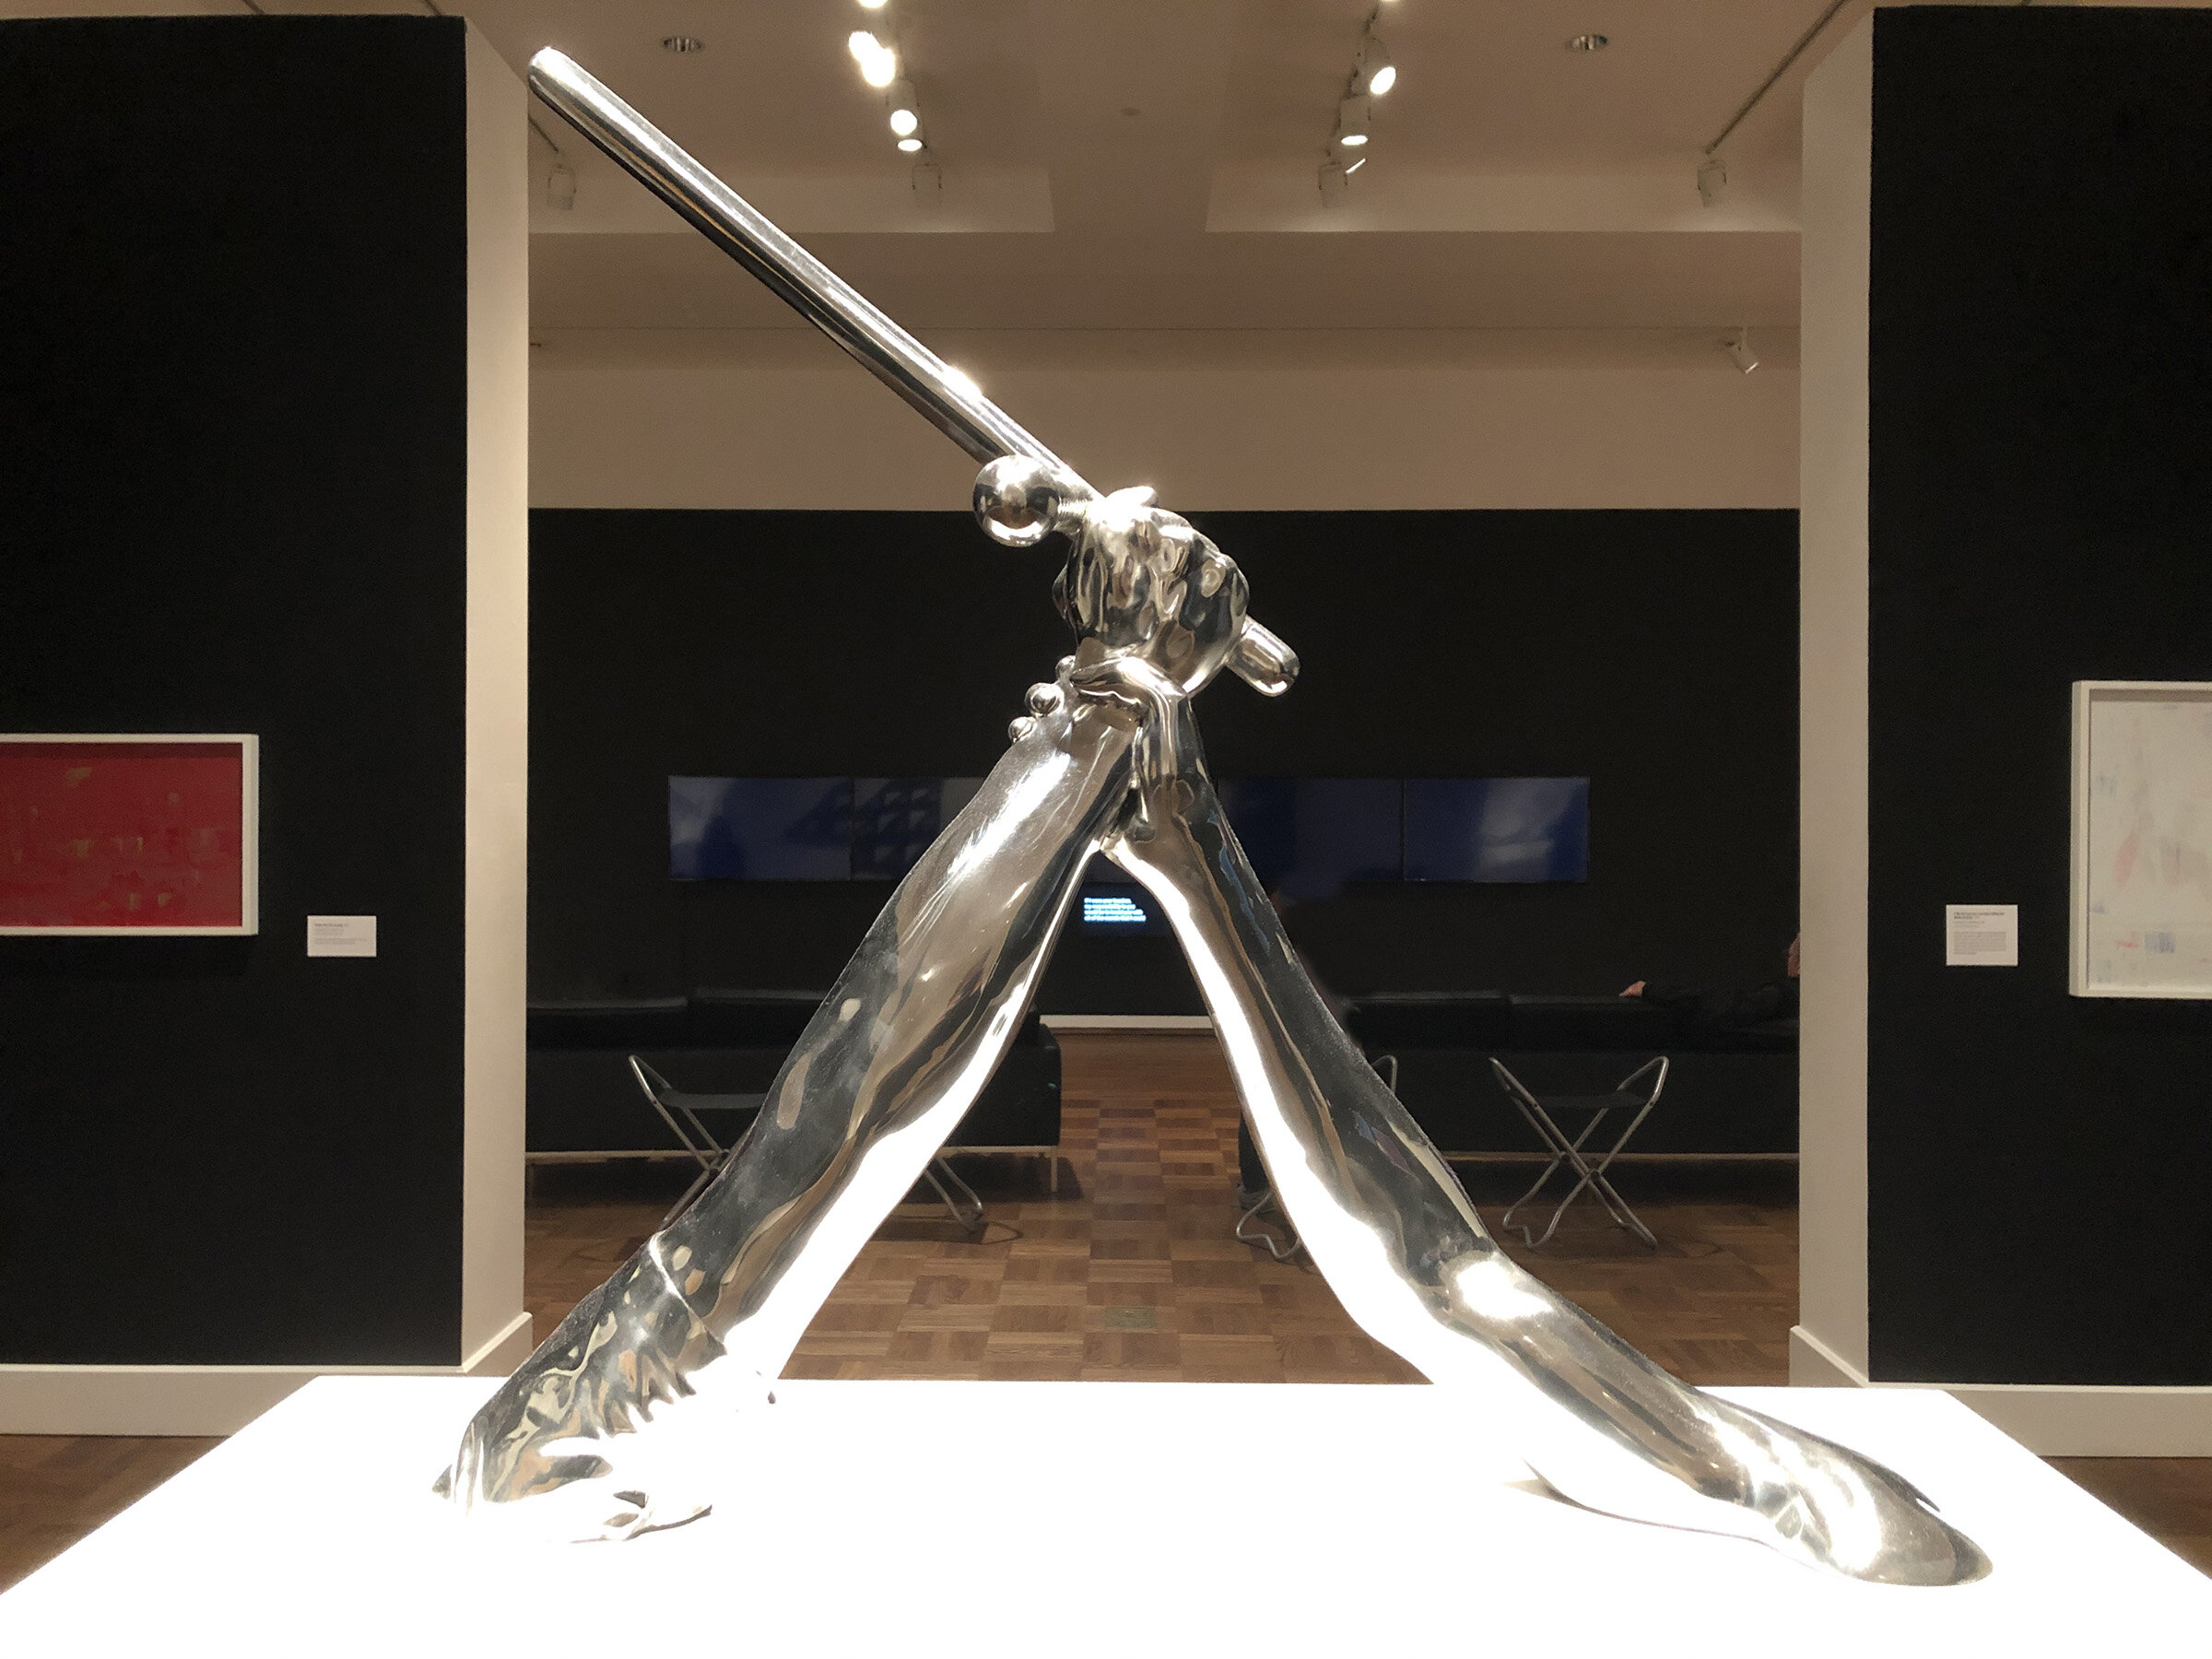 Strike,  2018, Stainless steel with mirrored finish